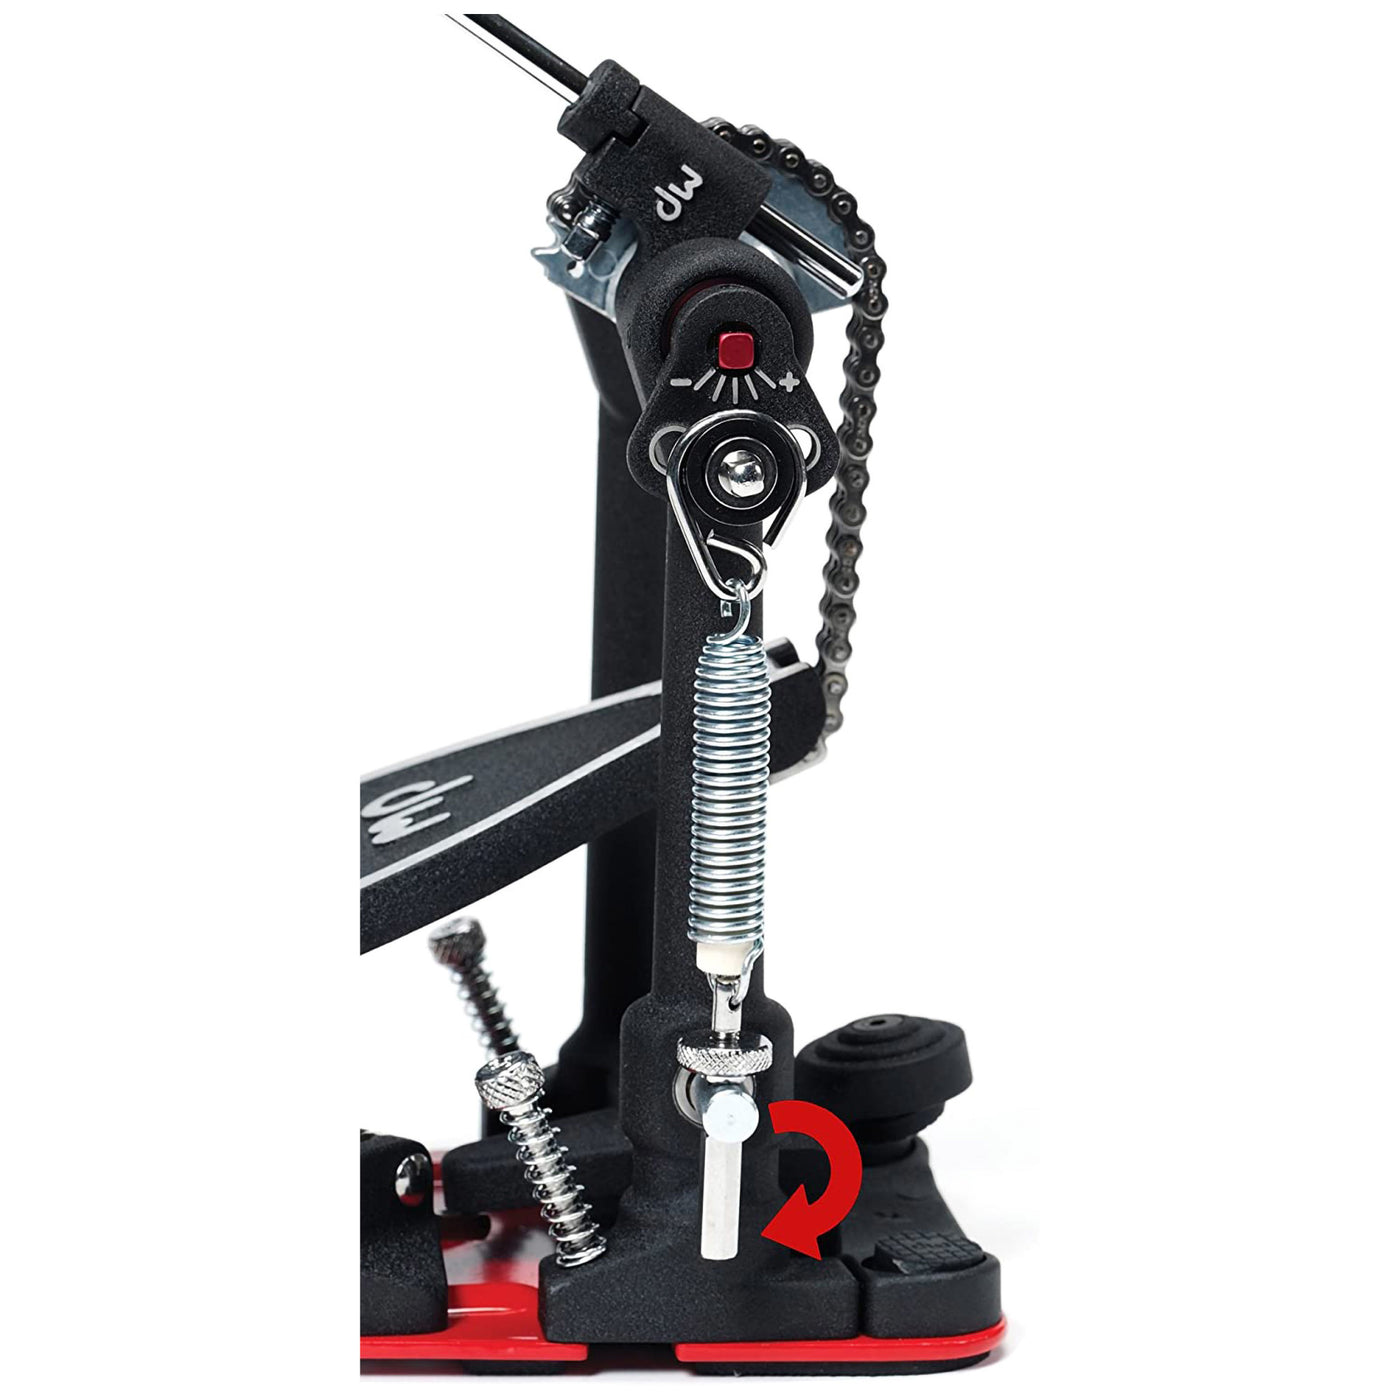 DW 5000 Series AD4 Accelerator Single Bass Drum Pedal